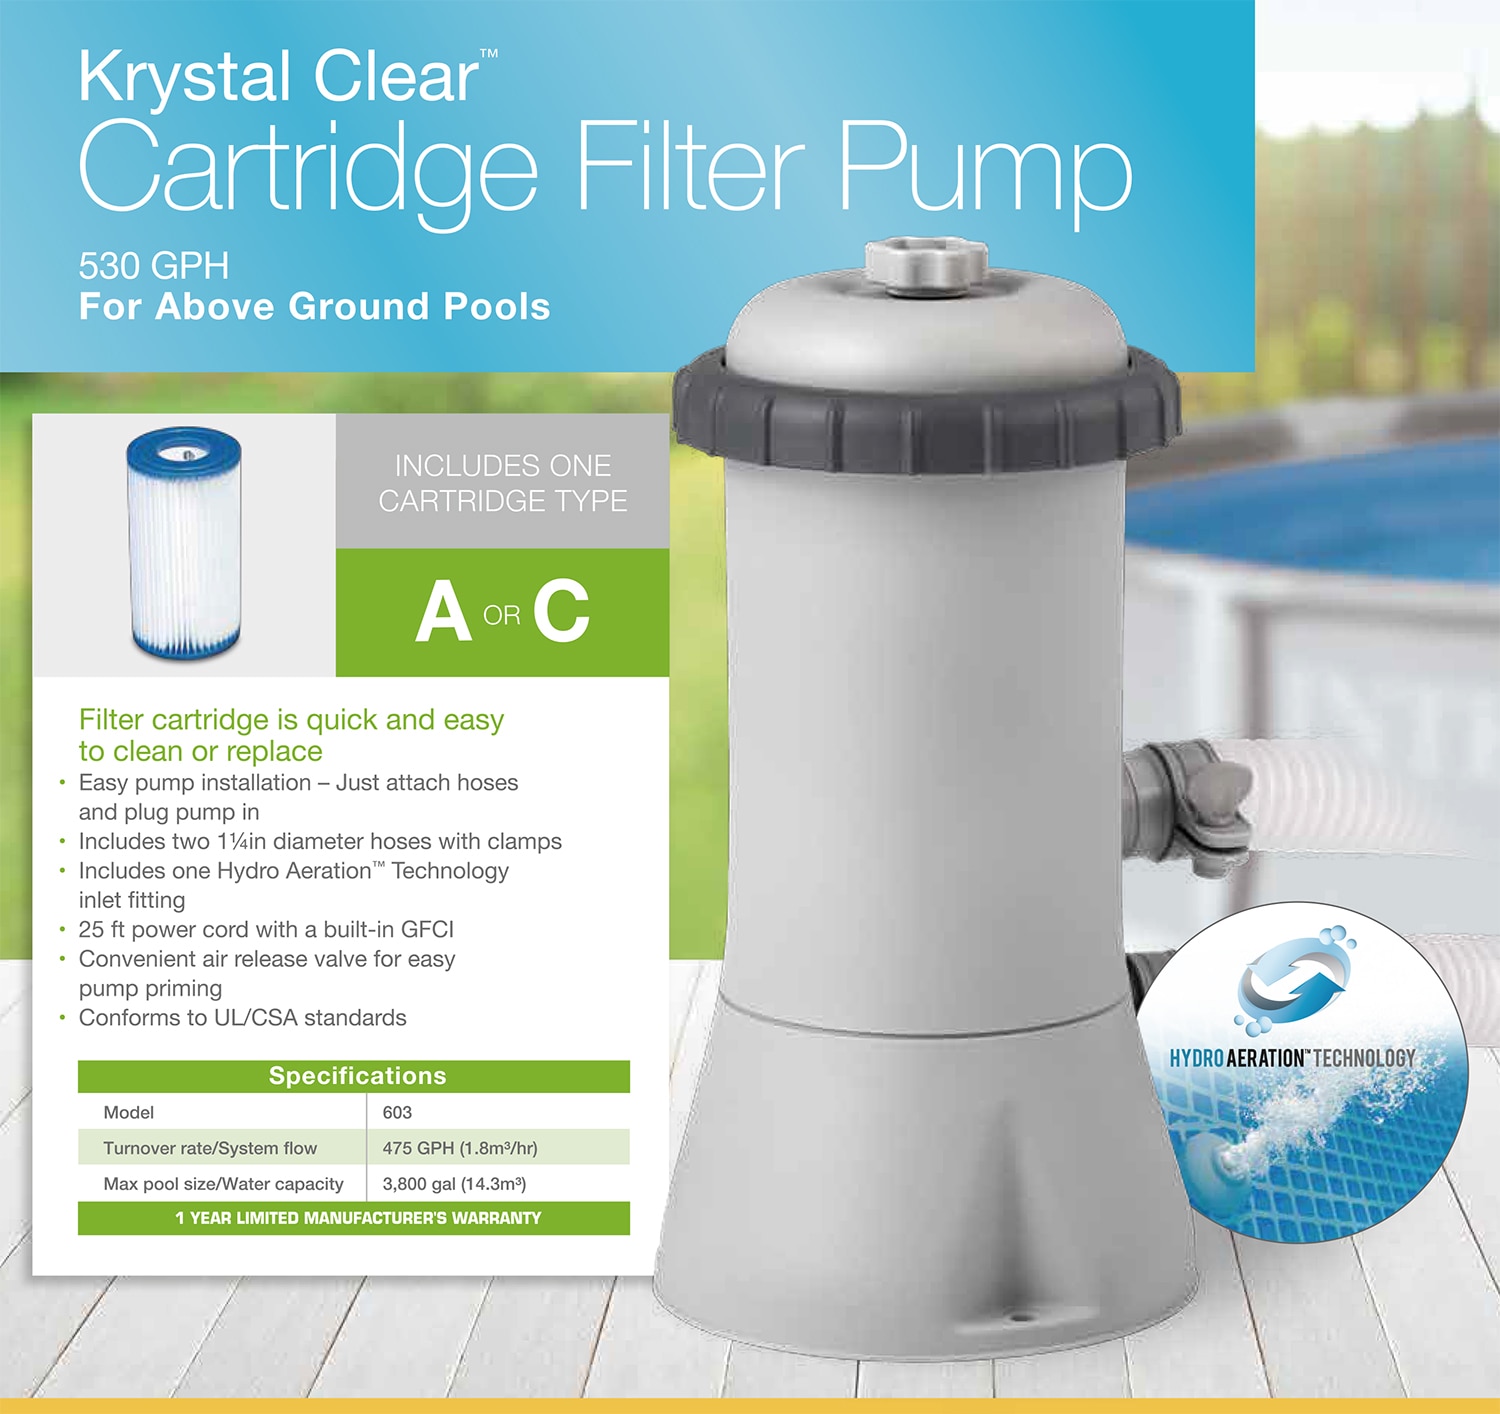 110-120V with GFCI Intex Krystal Clear Cartridge Filter Pump for Above Ground Pools 530 GPH Pump Flow Rate 